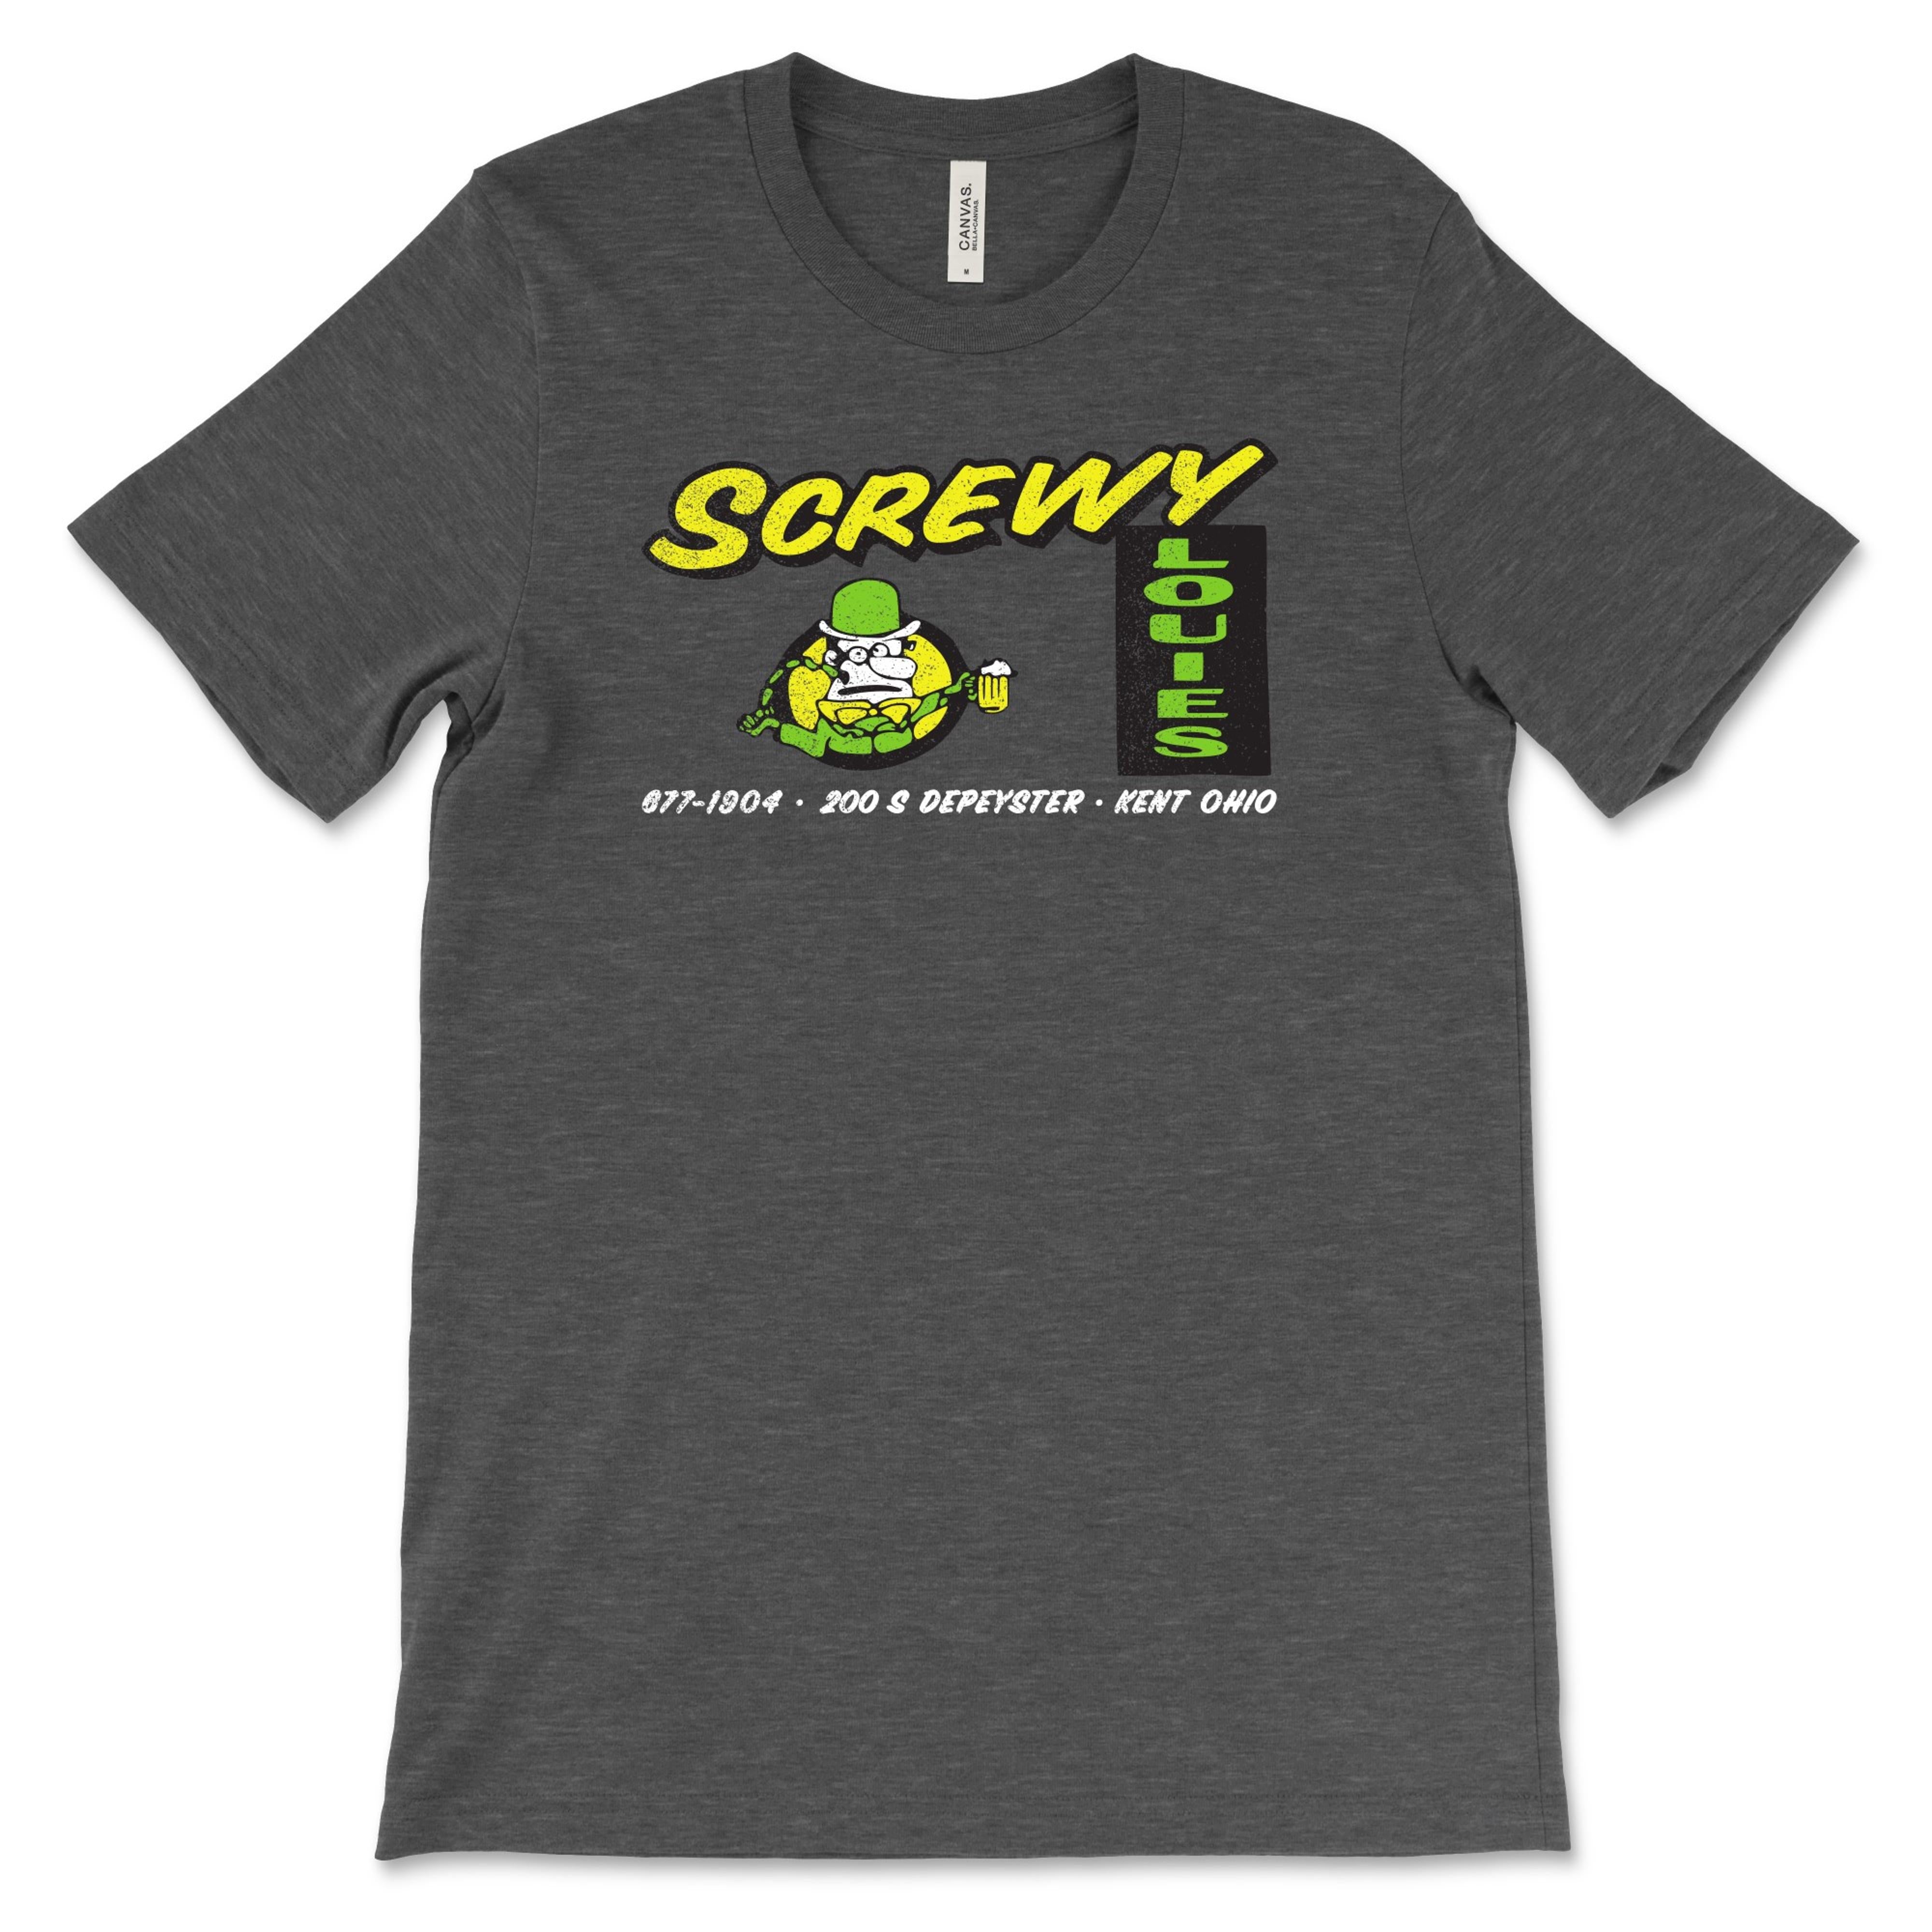 Softstyle Screwy Louies Gray T-Shirt